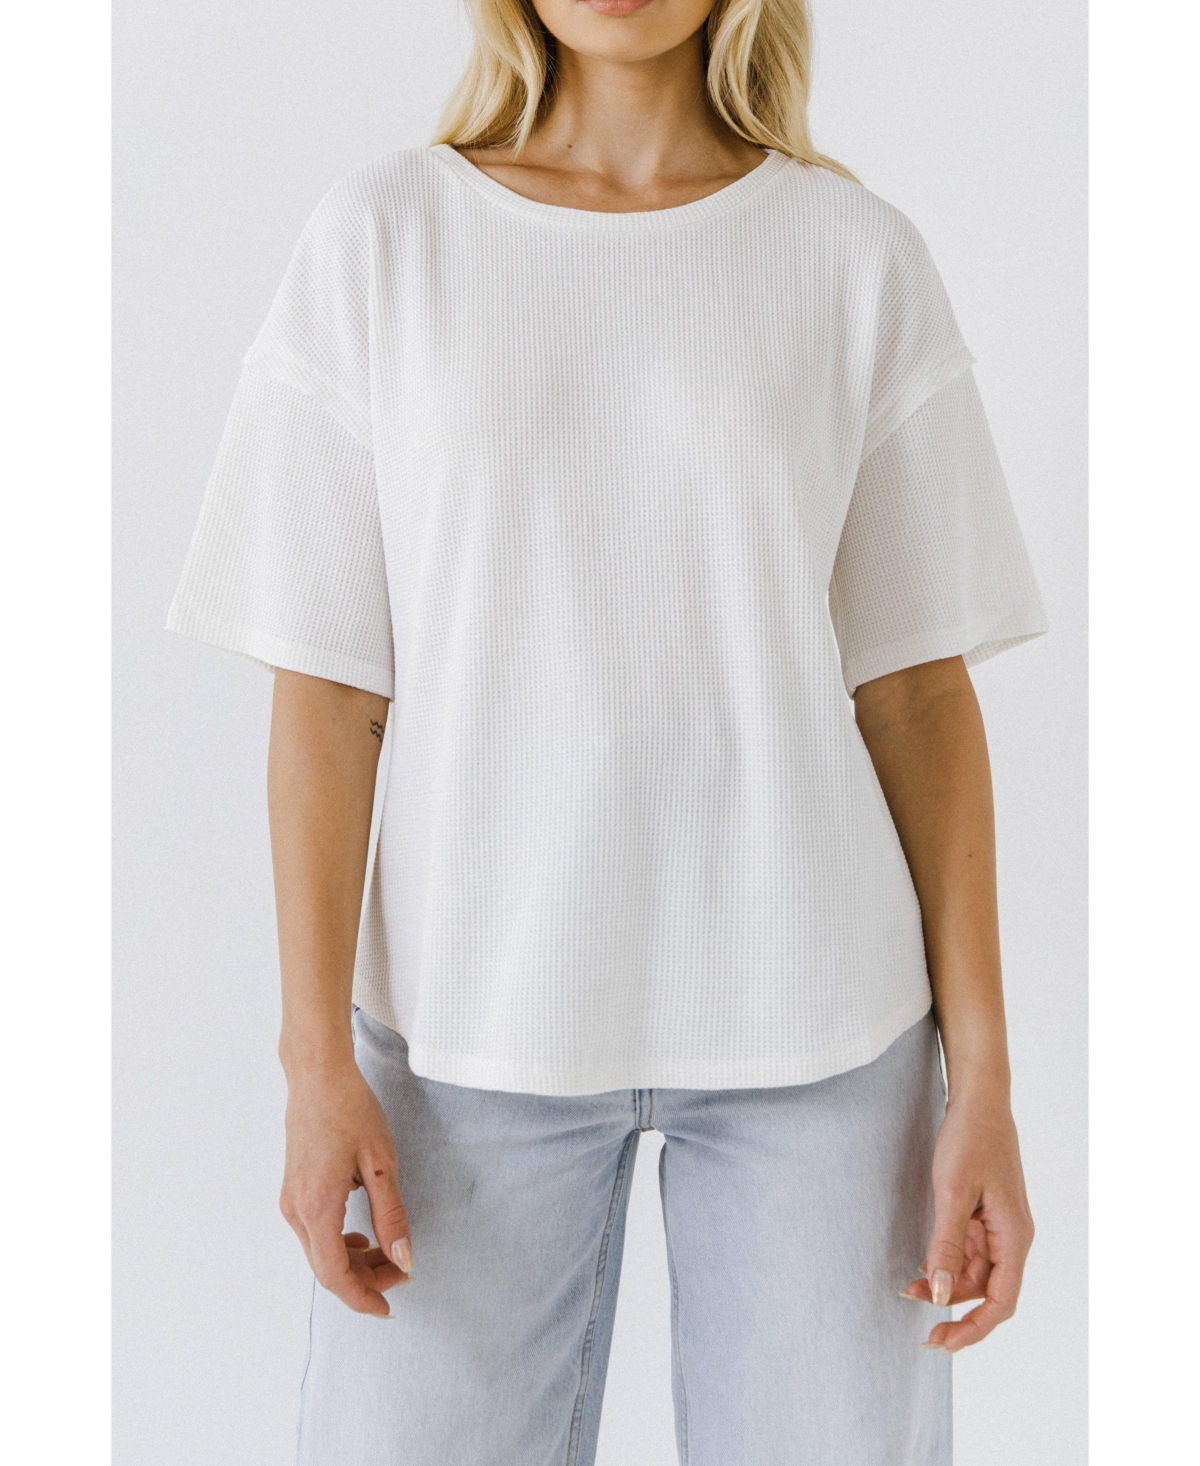 Women's Thermal Knit Top - White